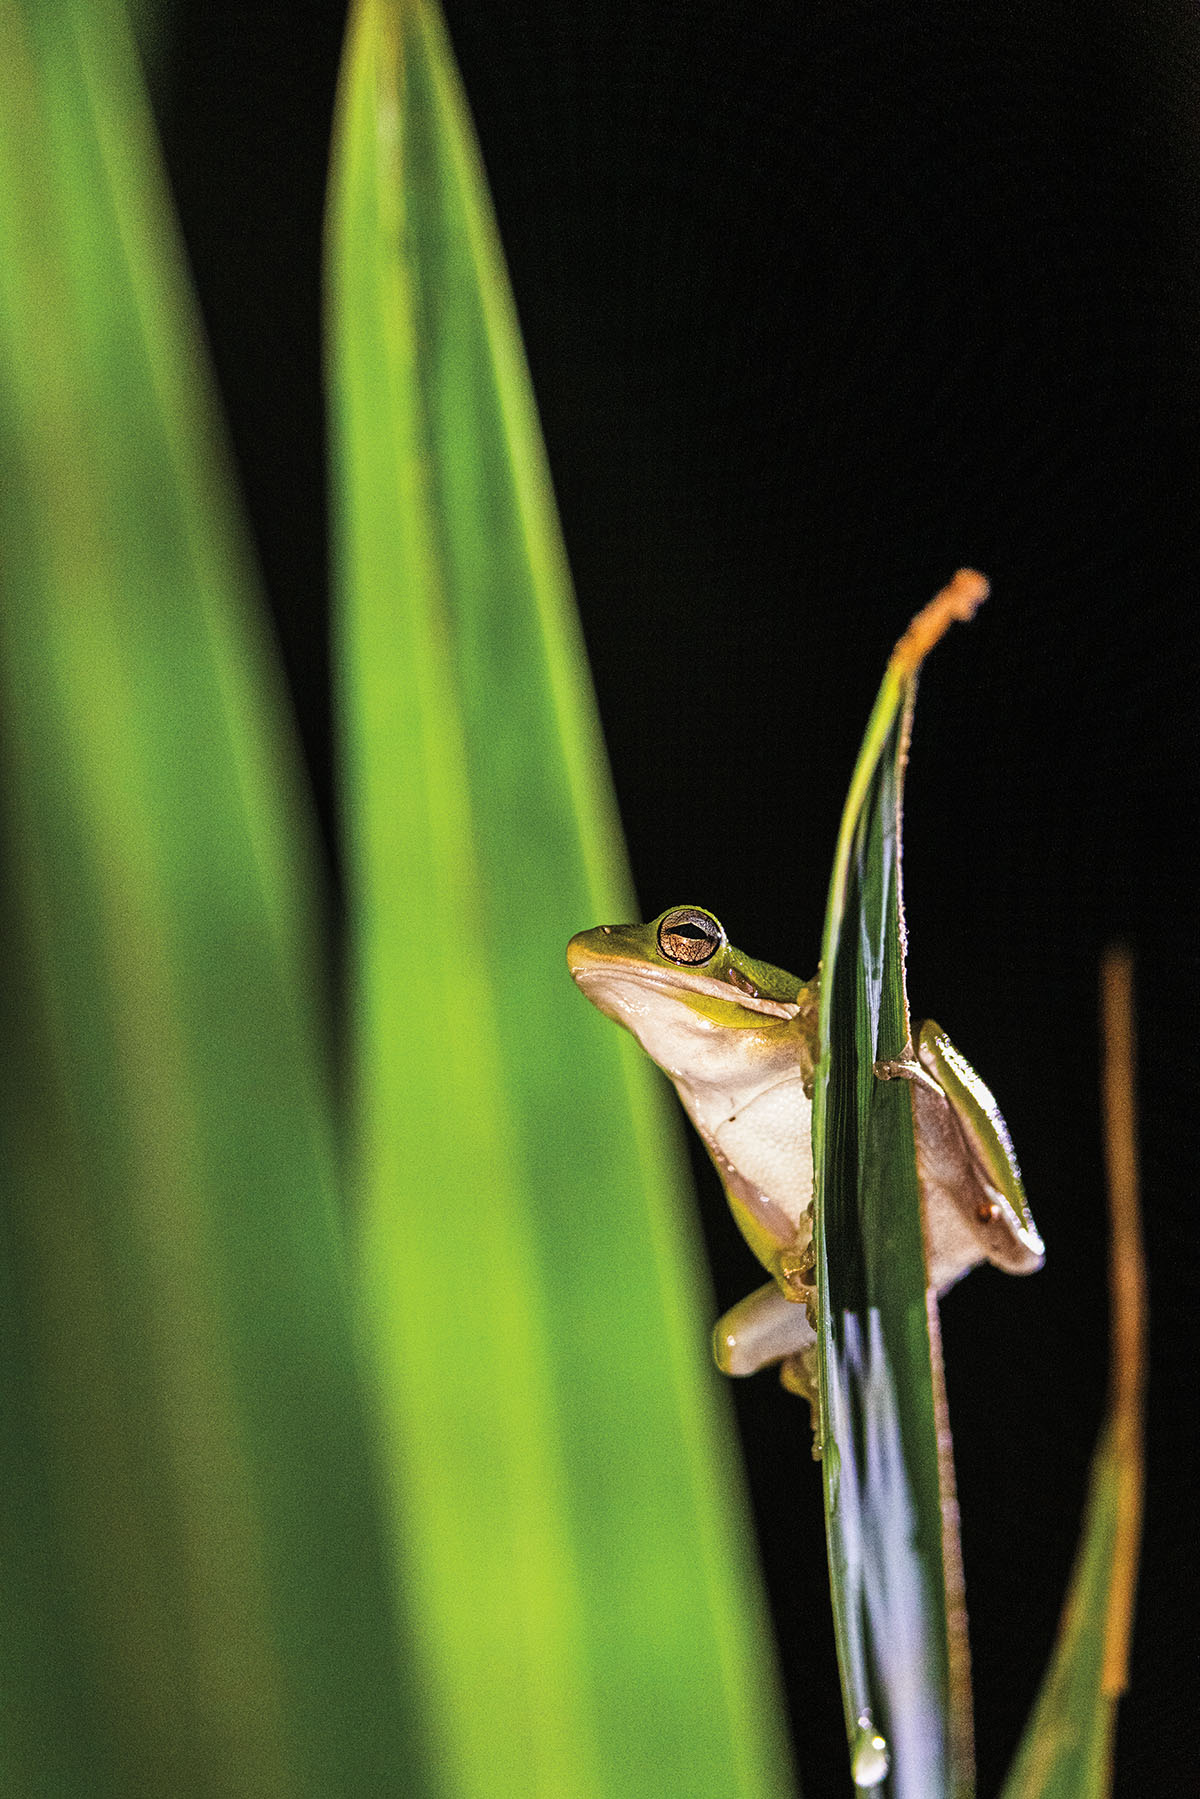 A frog perches on a green leaf in front of a dark background